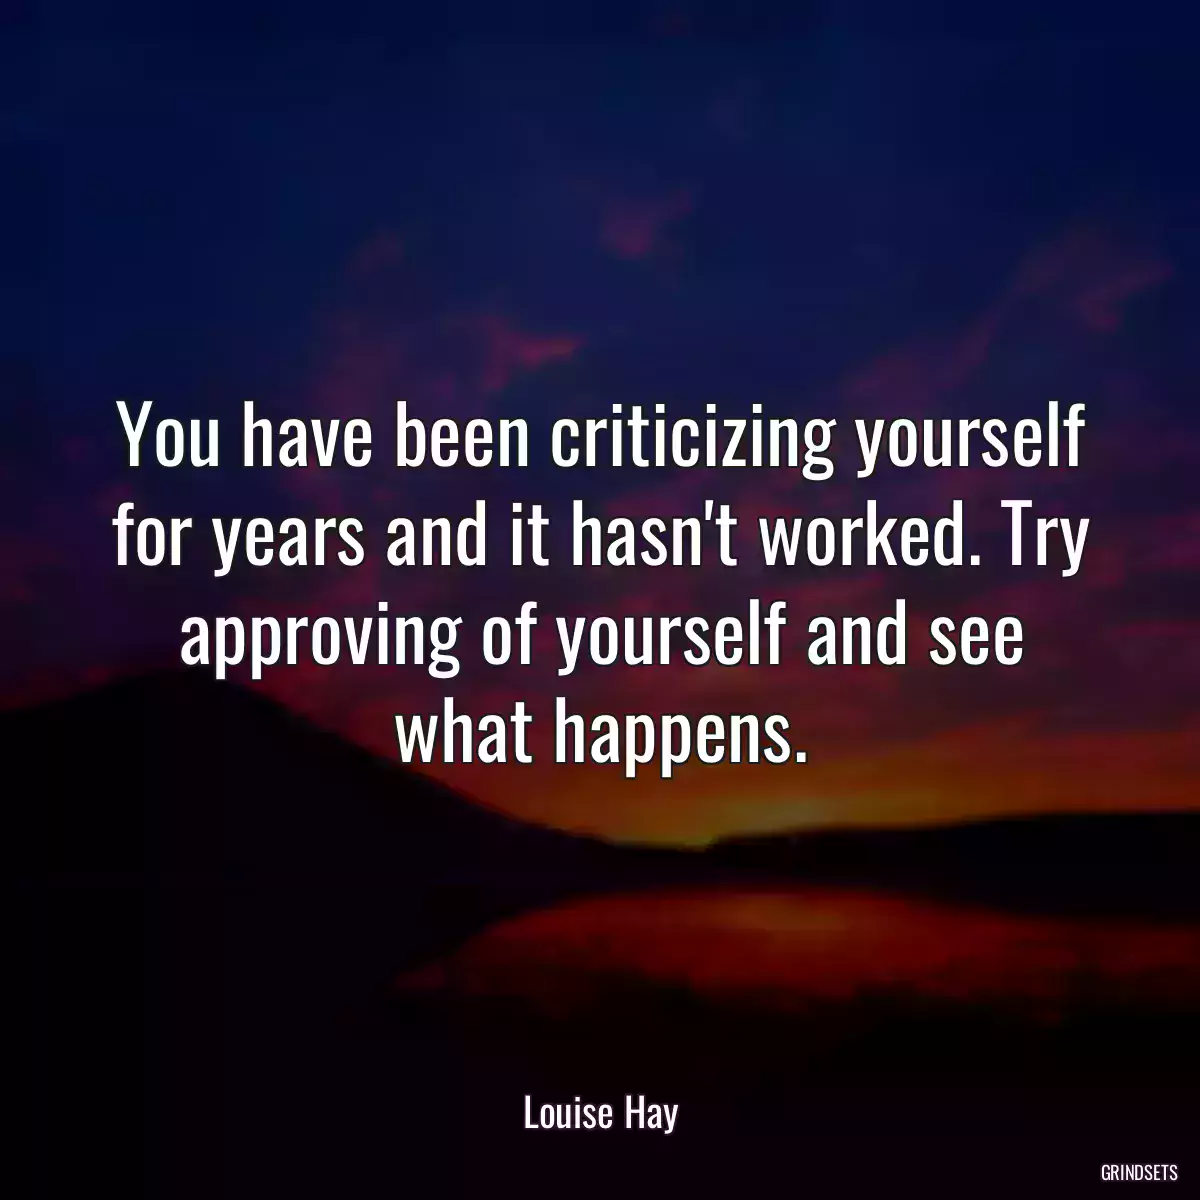 You have been criticizing yourself for years and it hasn\'t worked. Try approving of yourself and see what happens.